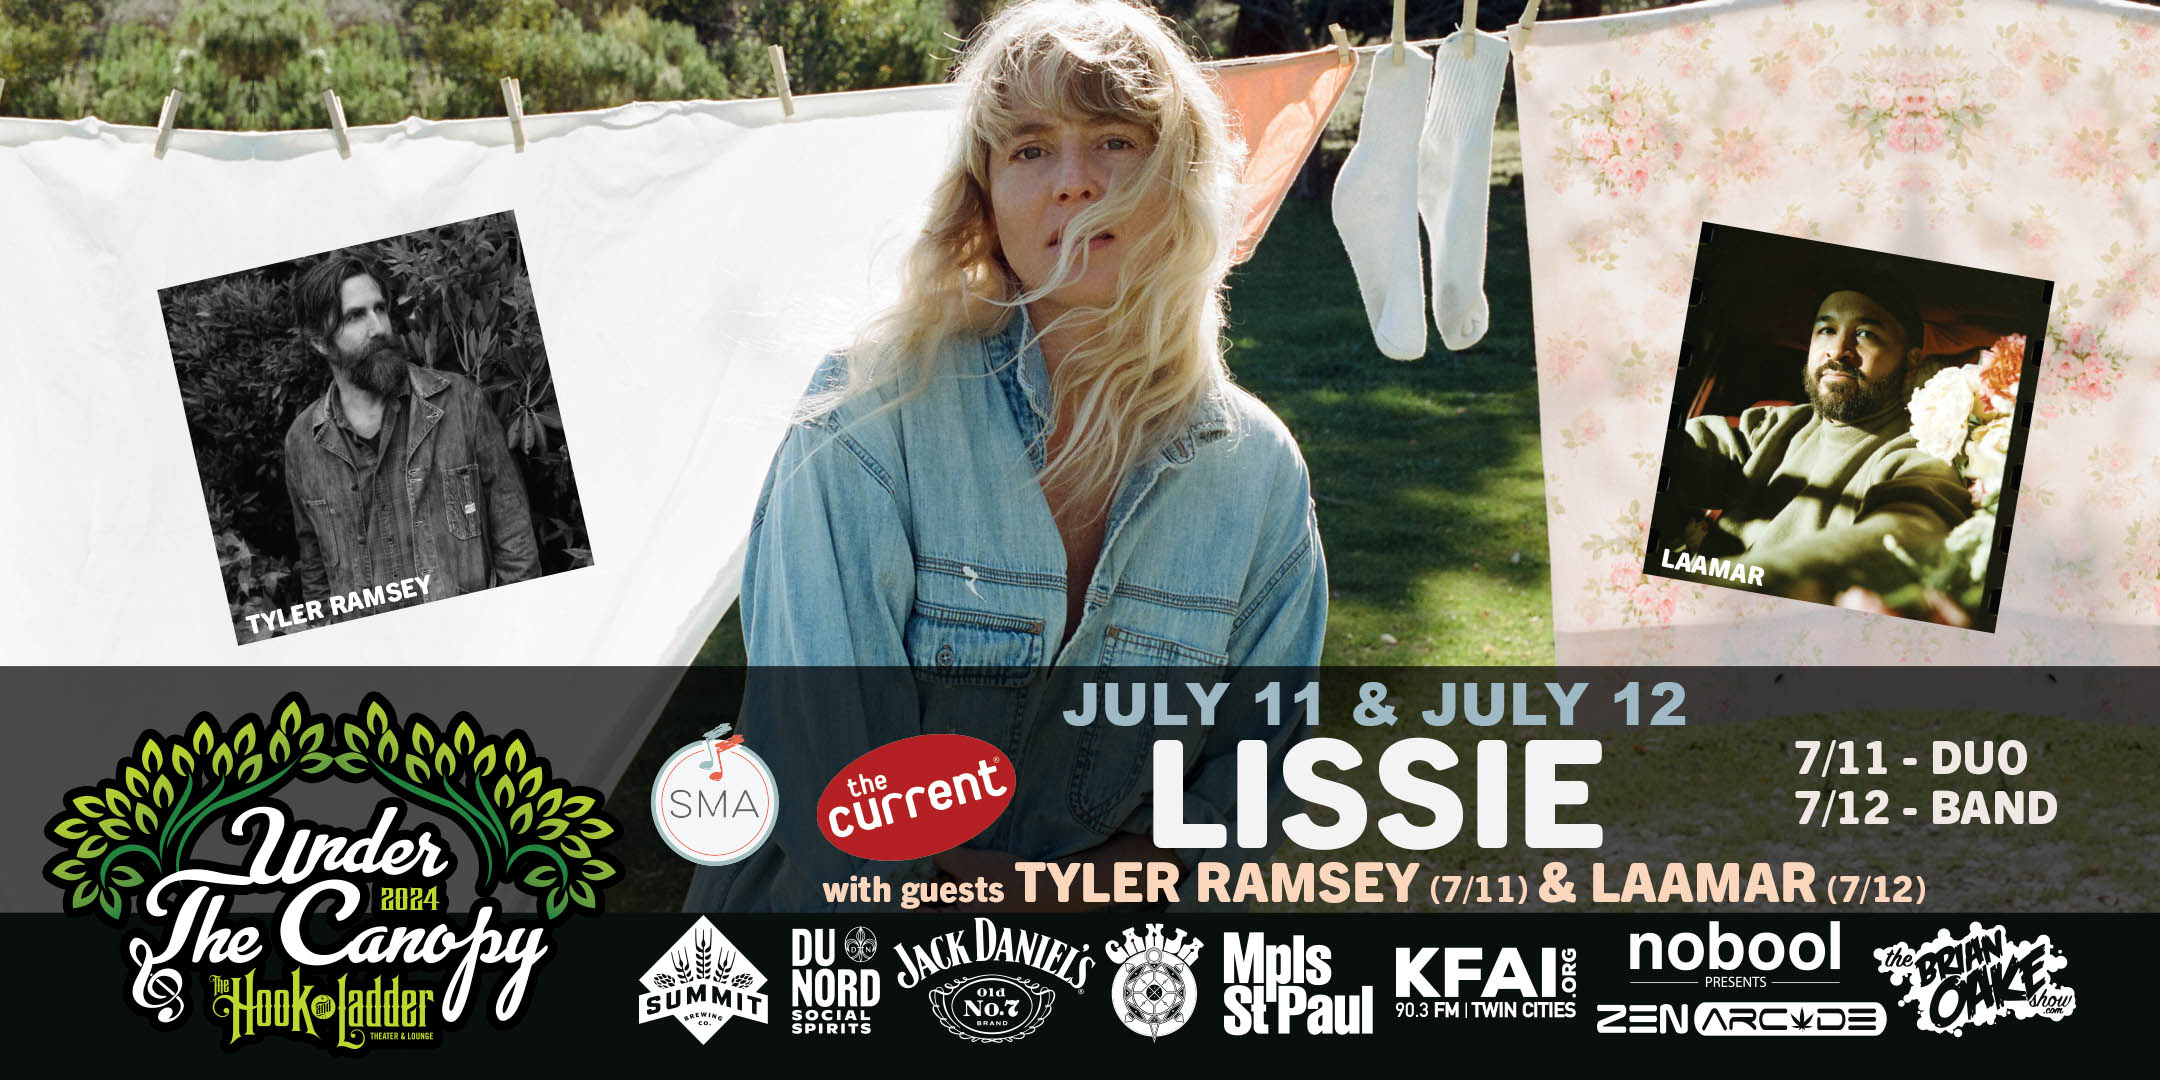 LISSIE (Full Band) with guest LAAMAR (Duo) Friday, July 12 Under The Canopy at The Hook and Ladder Theater "An Urban Outdoor Summer Concert Series" Doors 6:00pm :: Music 7:00pm :: 21+ VIP Meet & Greet: $107 (3 Song Acoustic Performance in Zen Arcade) GA: $32 ADV / $38 DOS